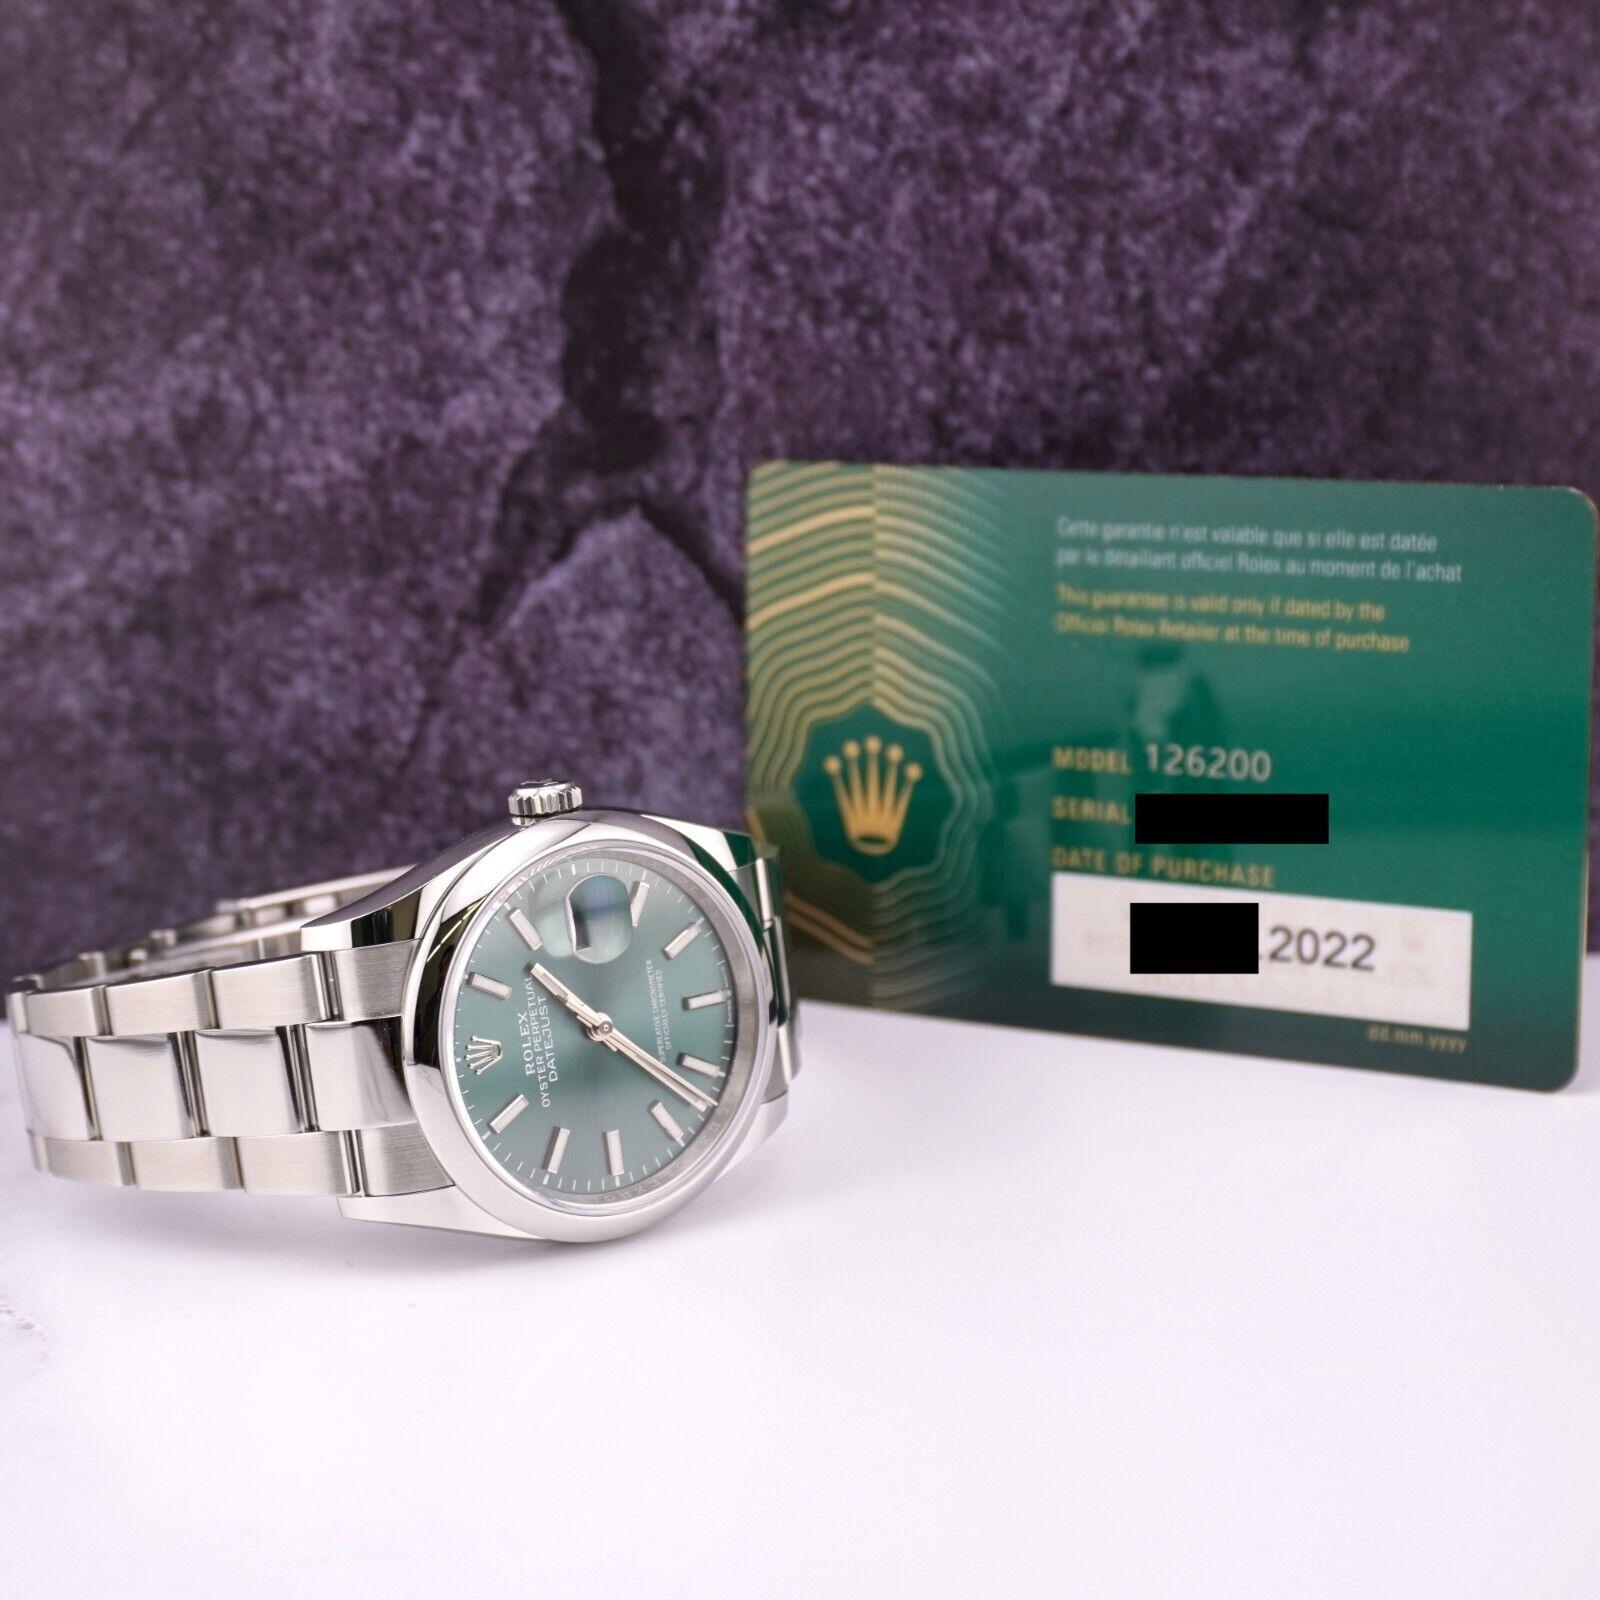 Rolex Datejust 36mm Stainless Steel Green Dial Smooth Oyster Watch Ref: 126200 For Sale 4